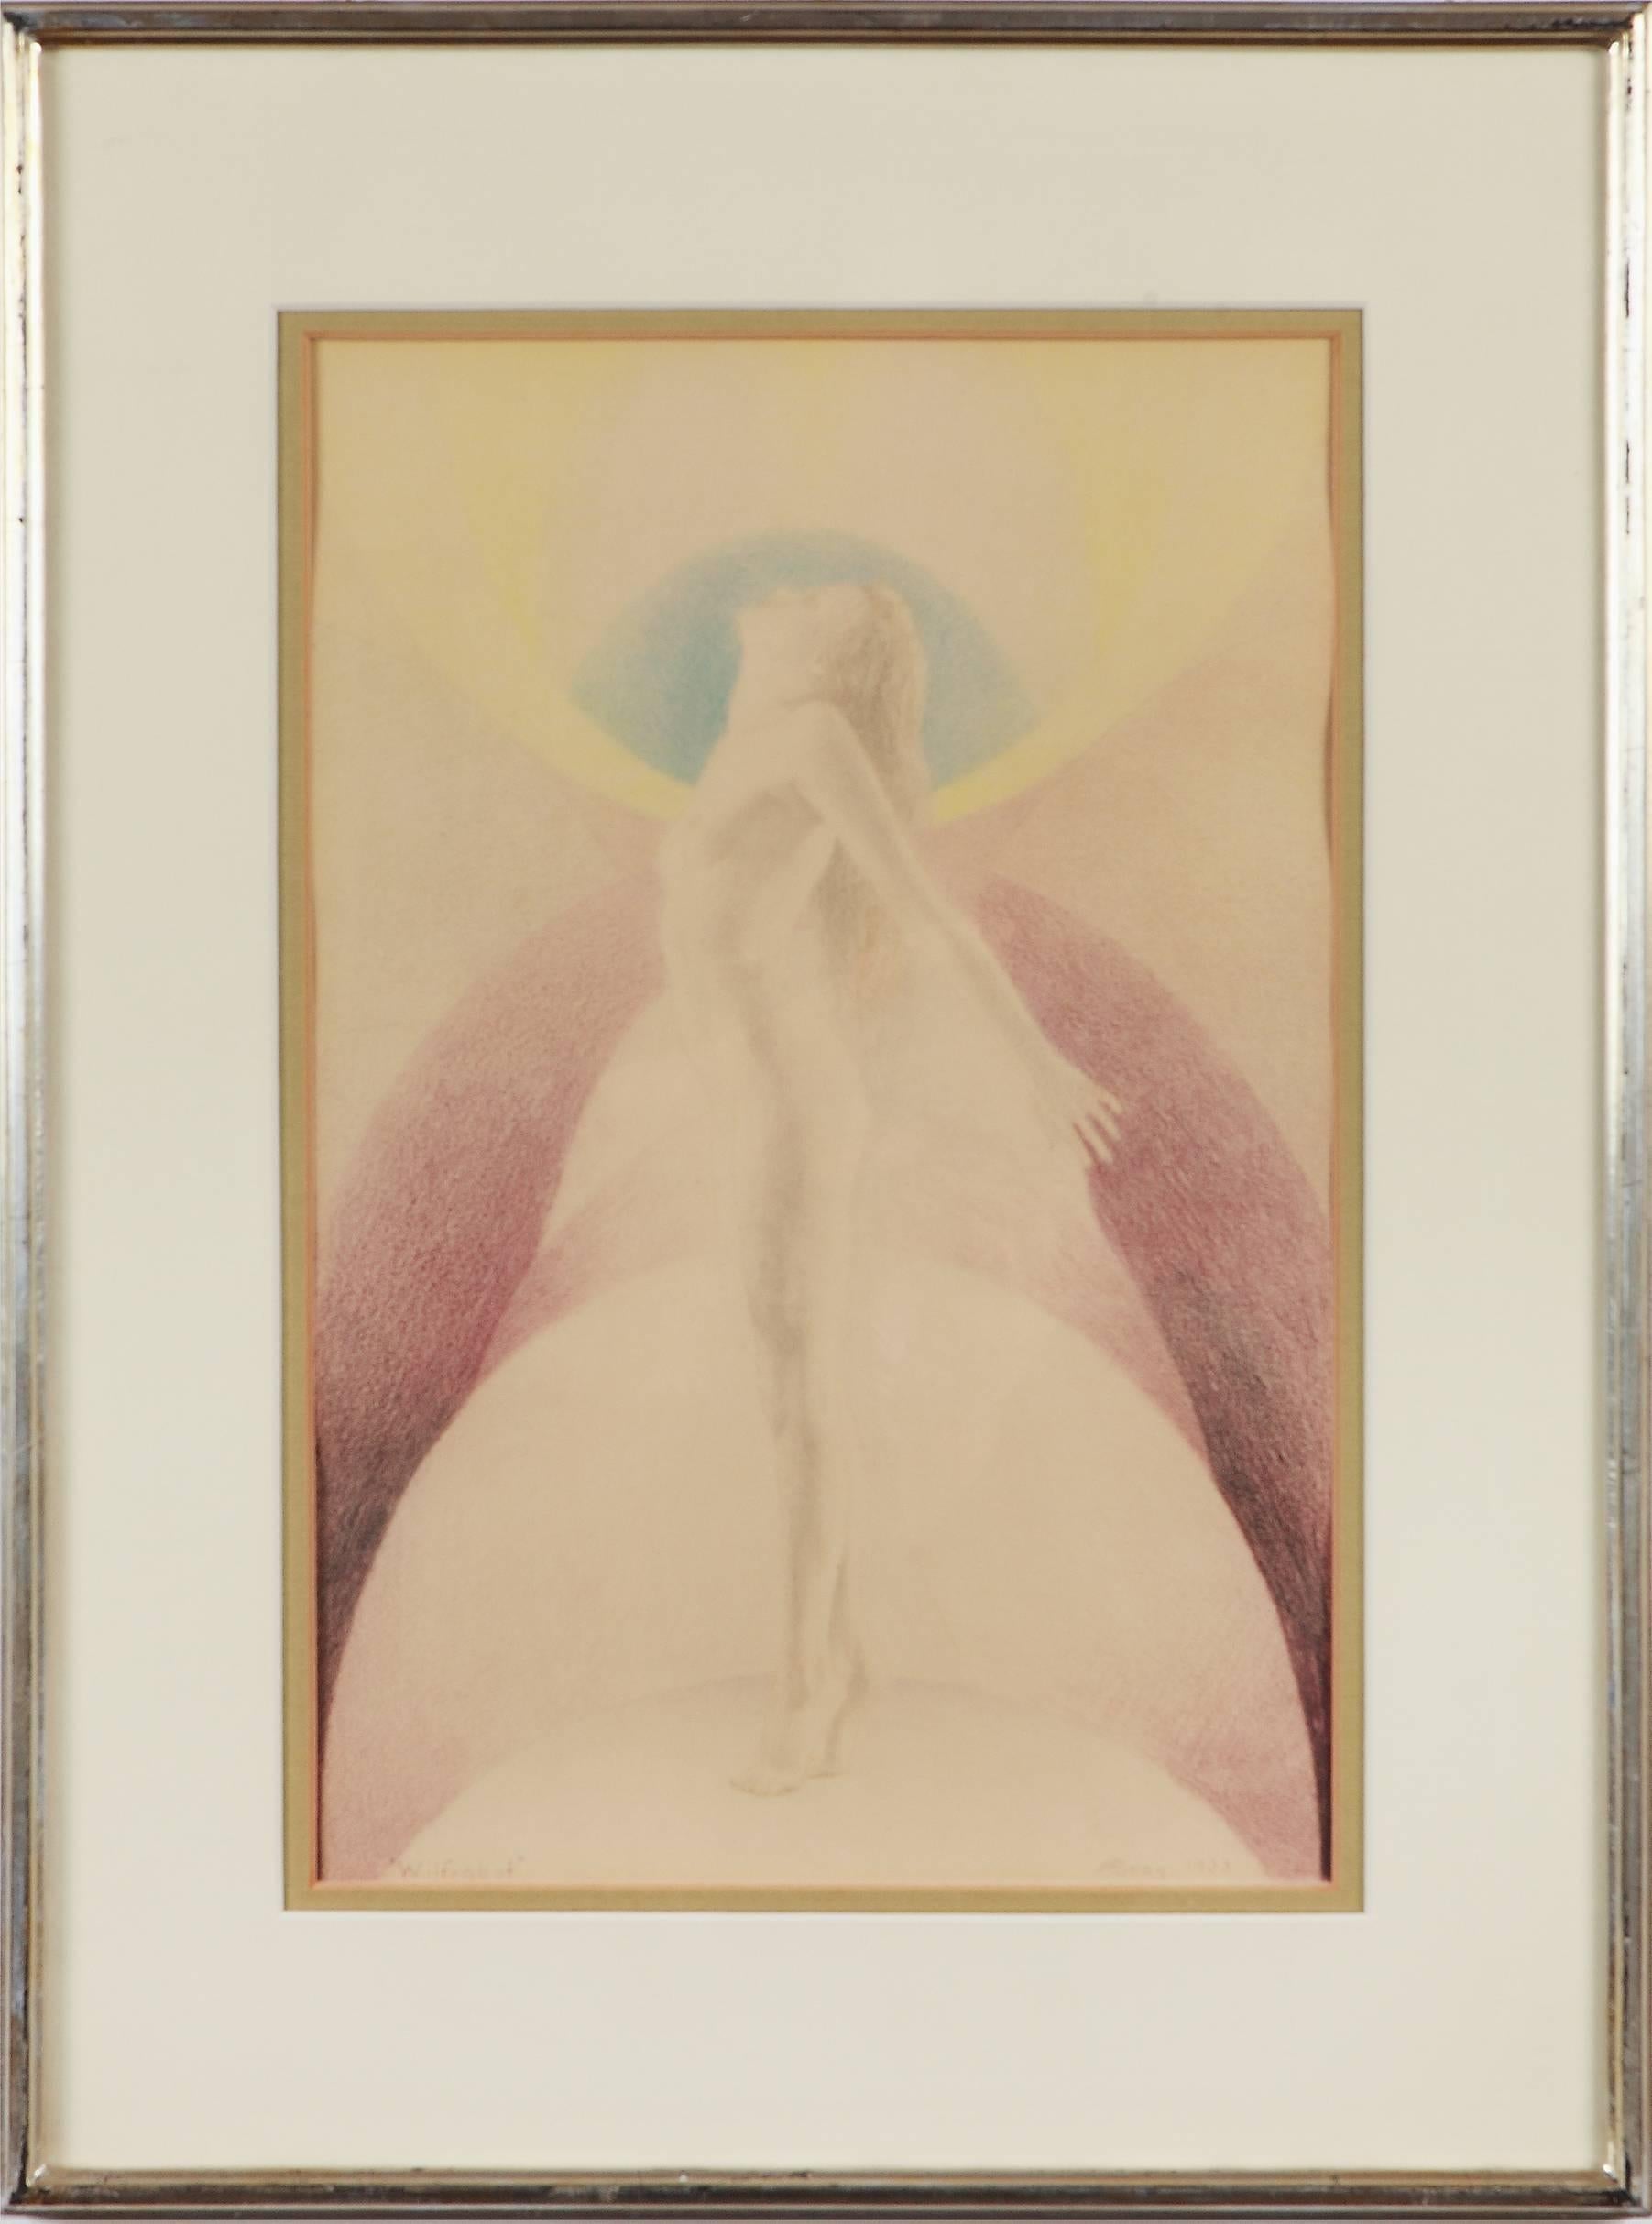 Pastel and Pencil on Paper 1933